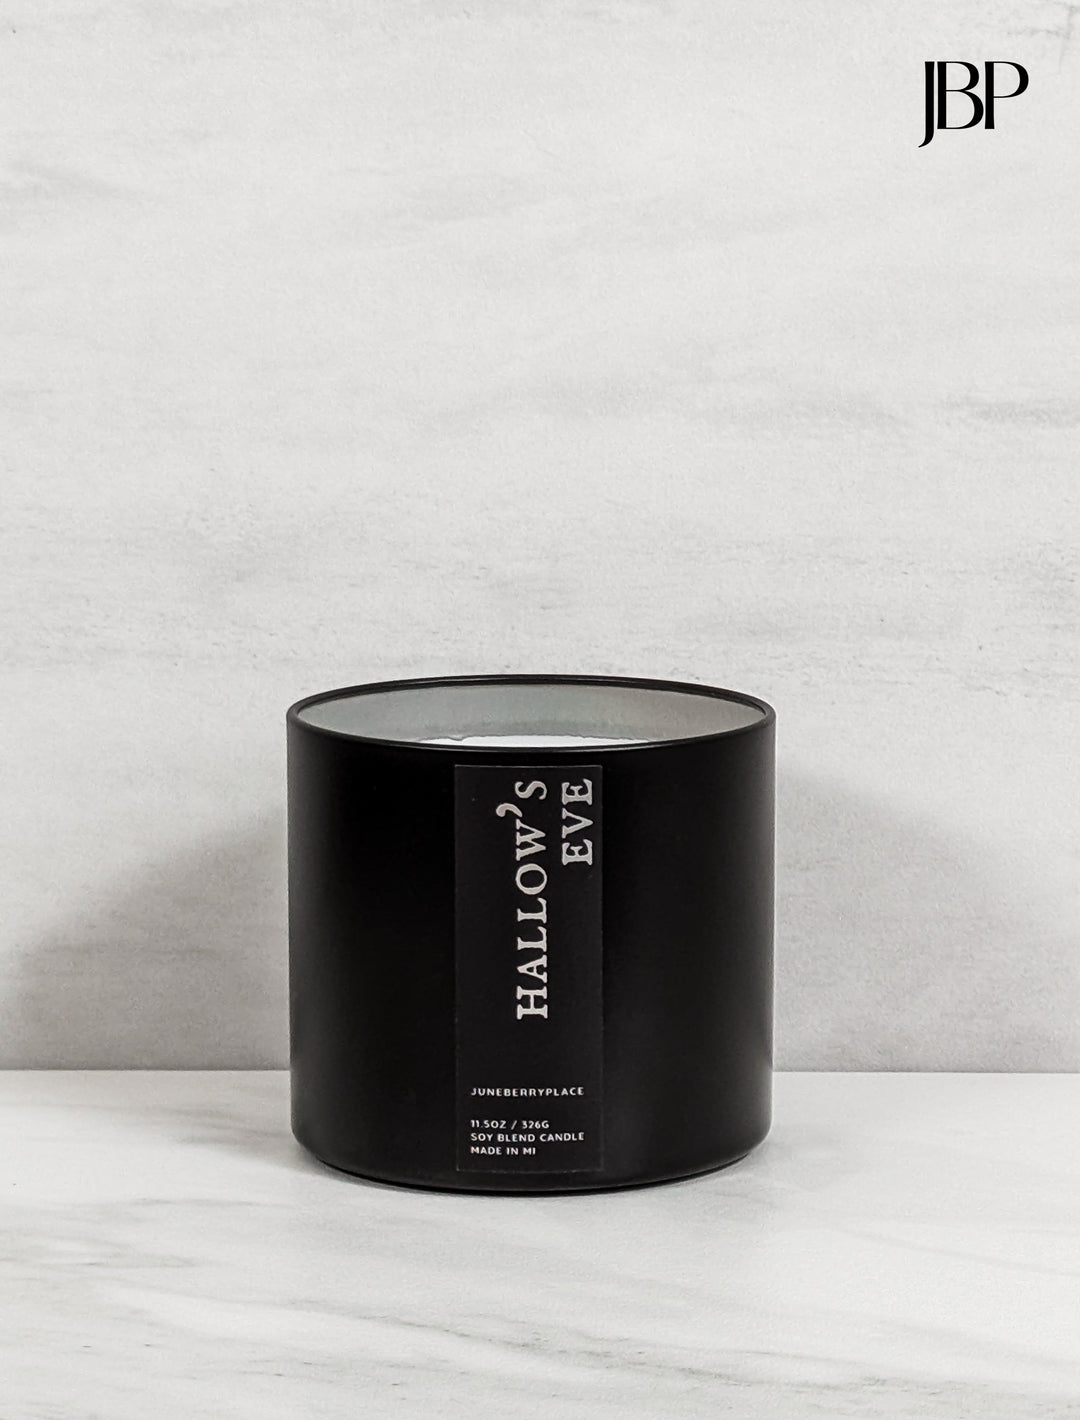 Hallow's Eve Wood Wick Soy Candle in matte black vessel by juneberryplace home fragrances